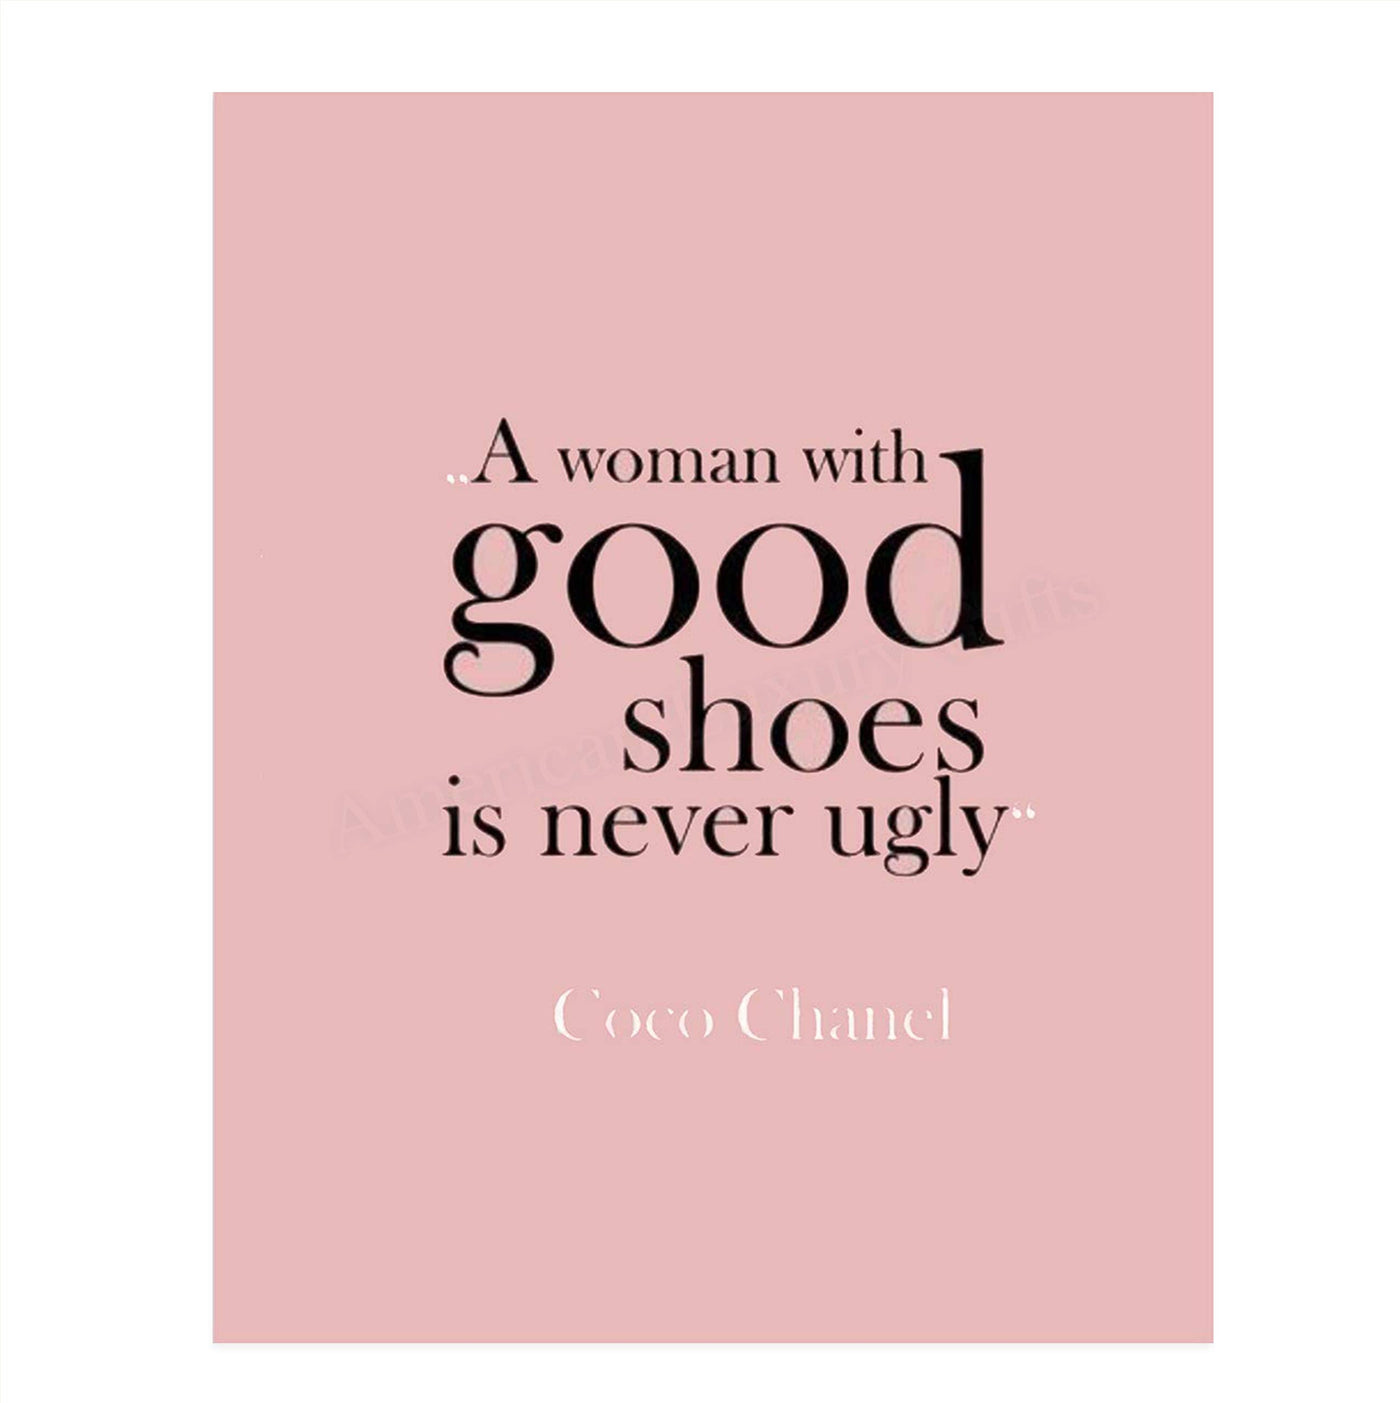 A woman with good shoes I never ugly!